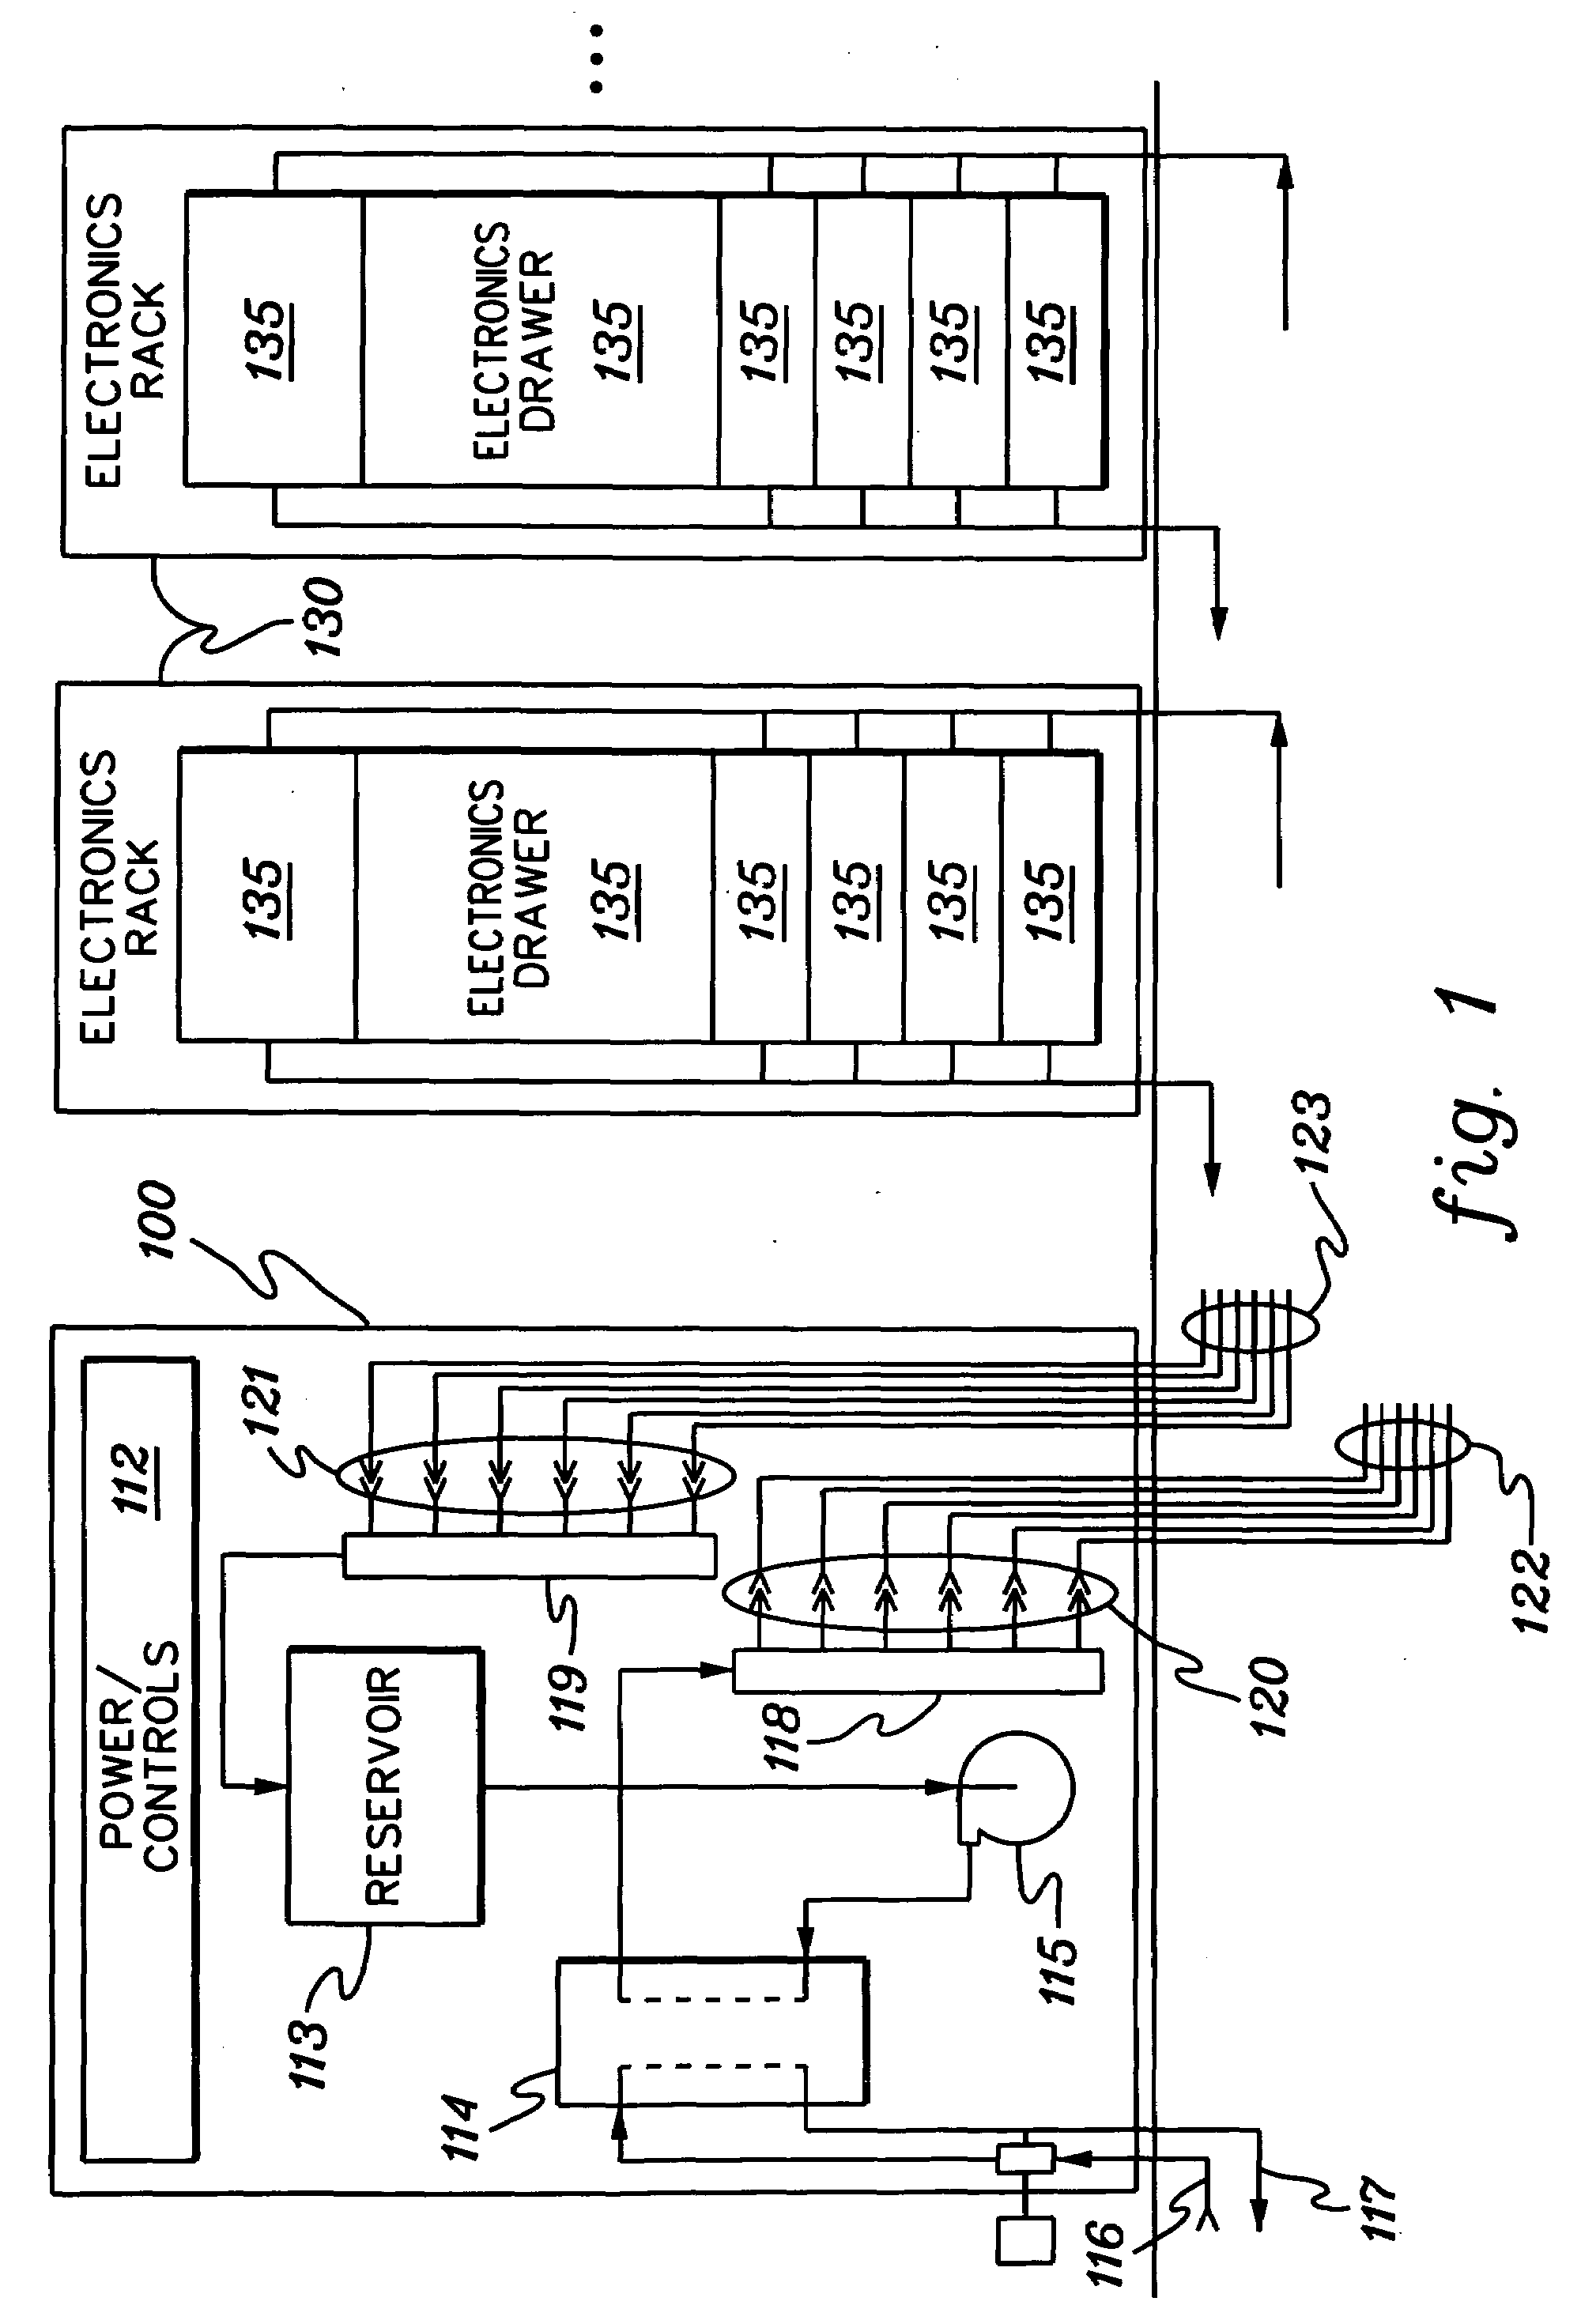 Cooling apparatus for an electronics subsystem employing a coolant flow drive apparatus between coolant flow paths